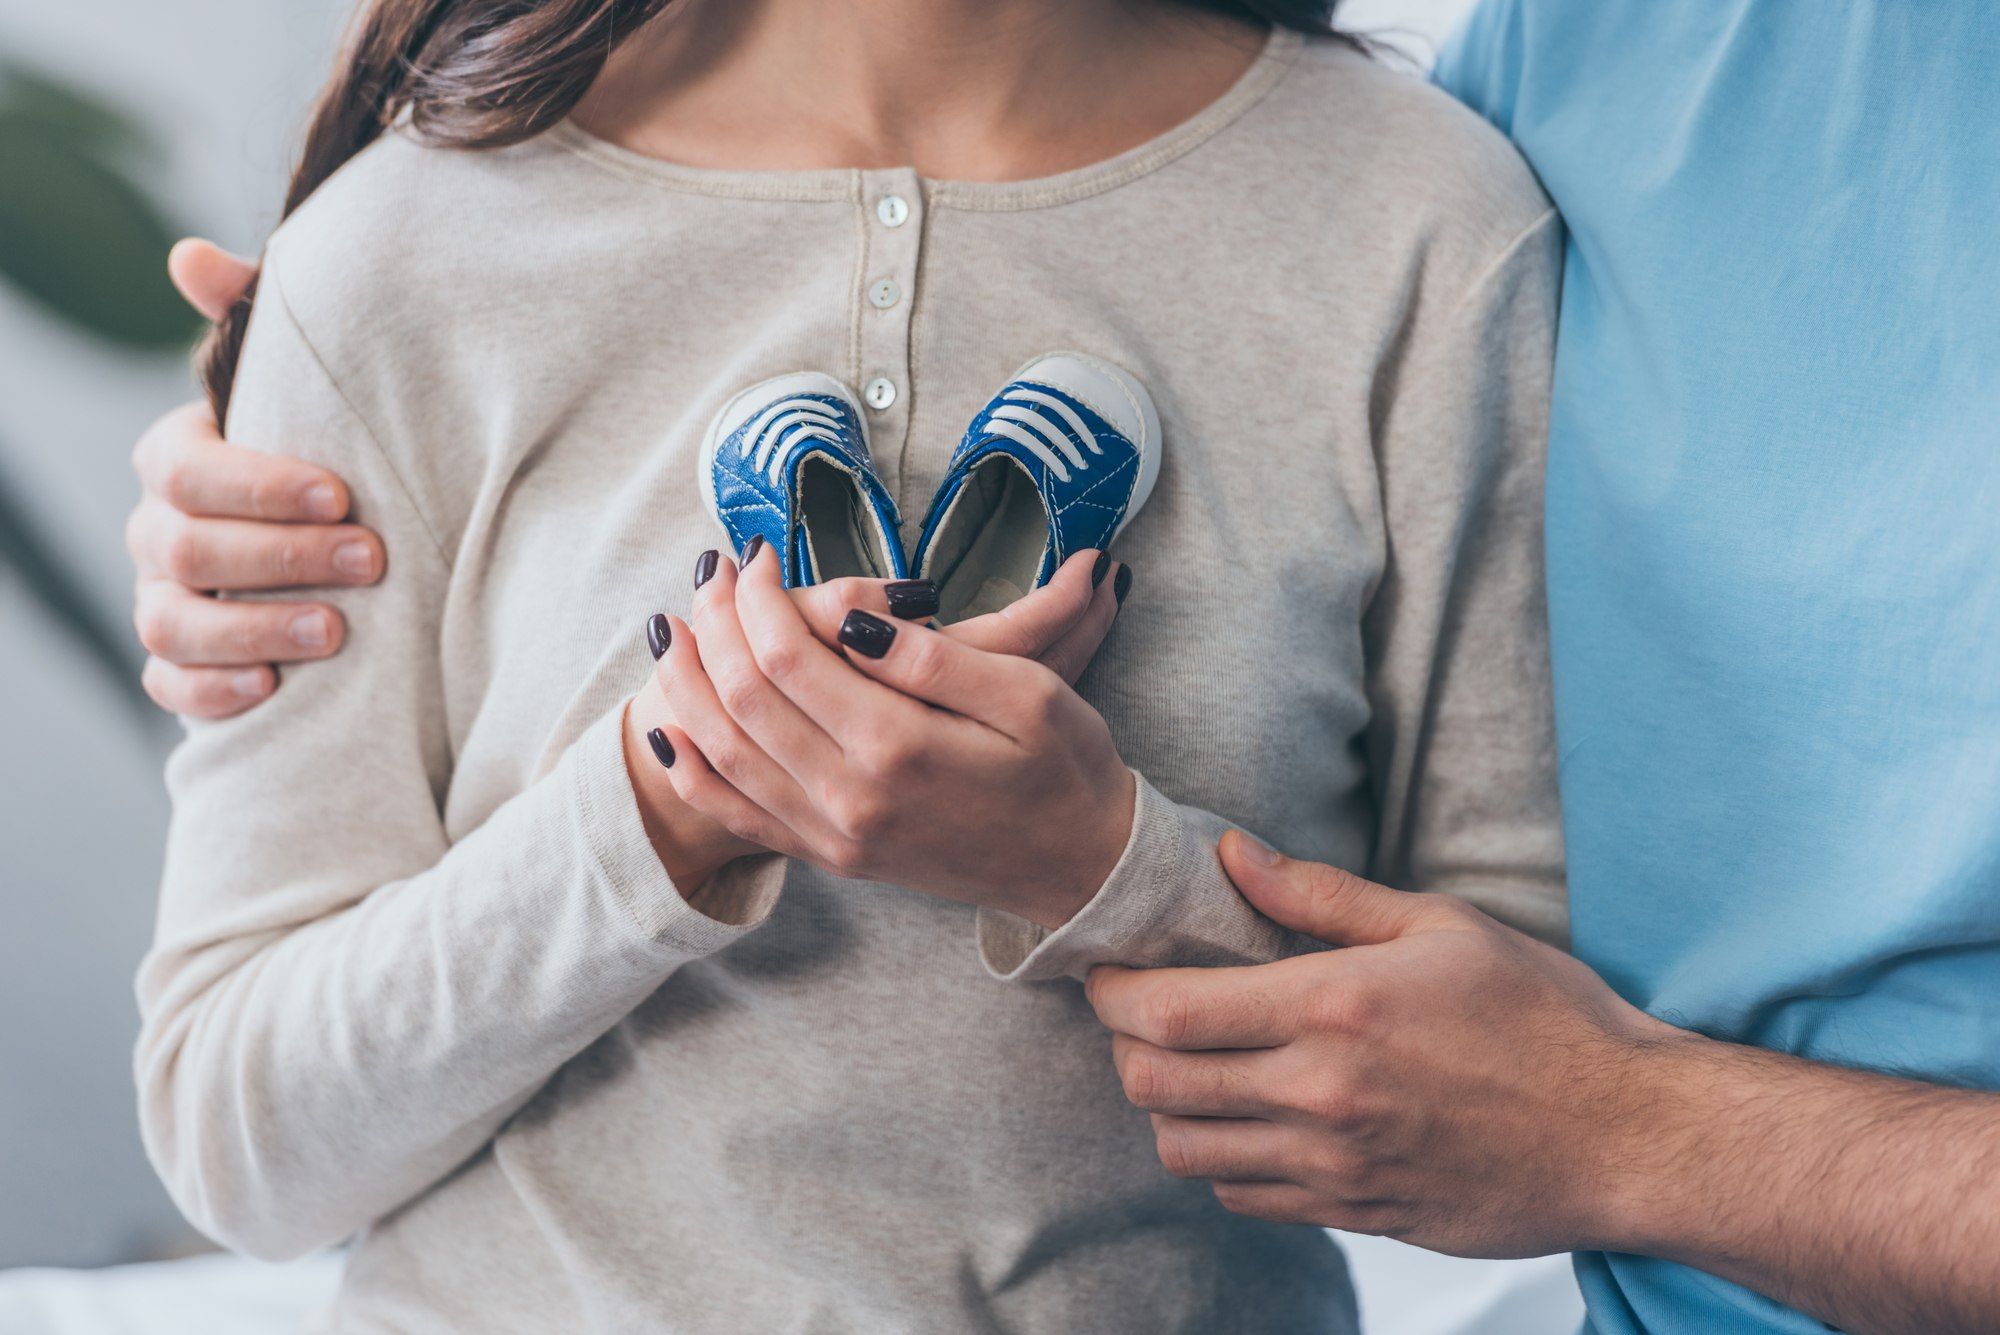 Woman holding baby shoes embraced by man regarding the Adoption By Choice lawsuit filed after the Calgary adoptions agency closed